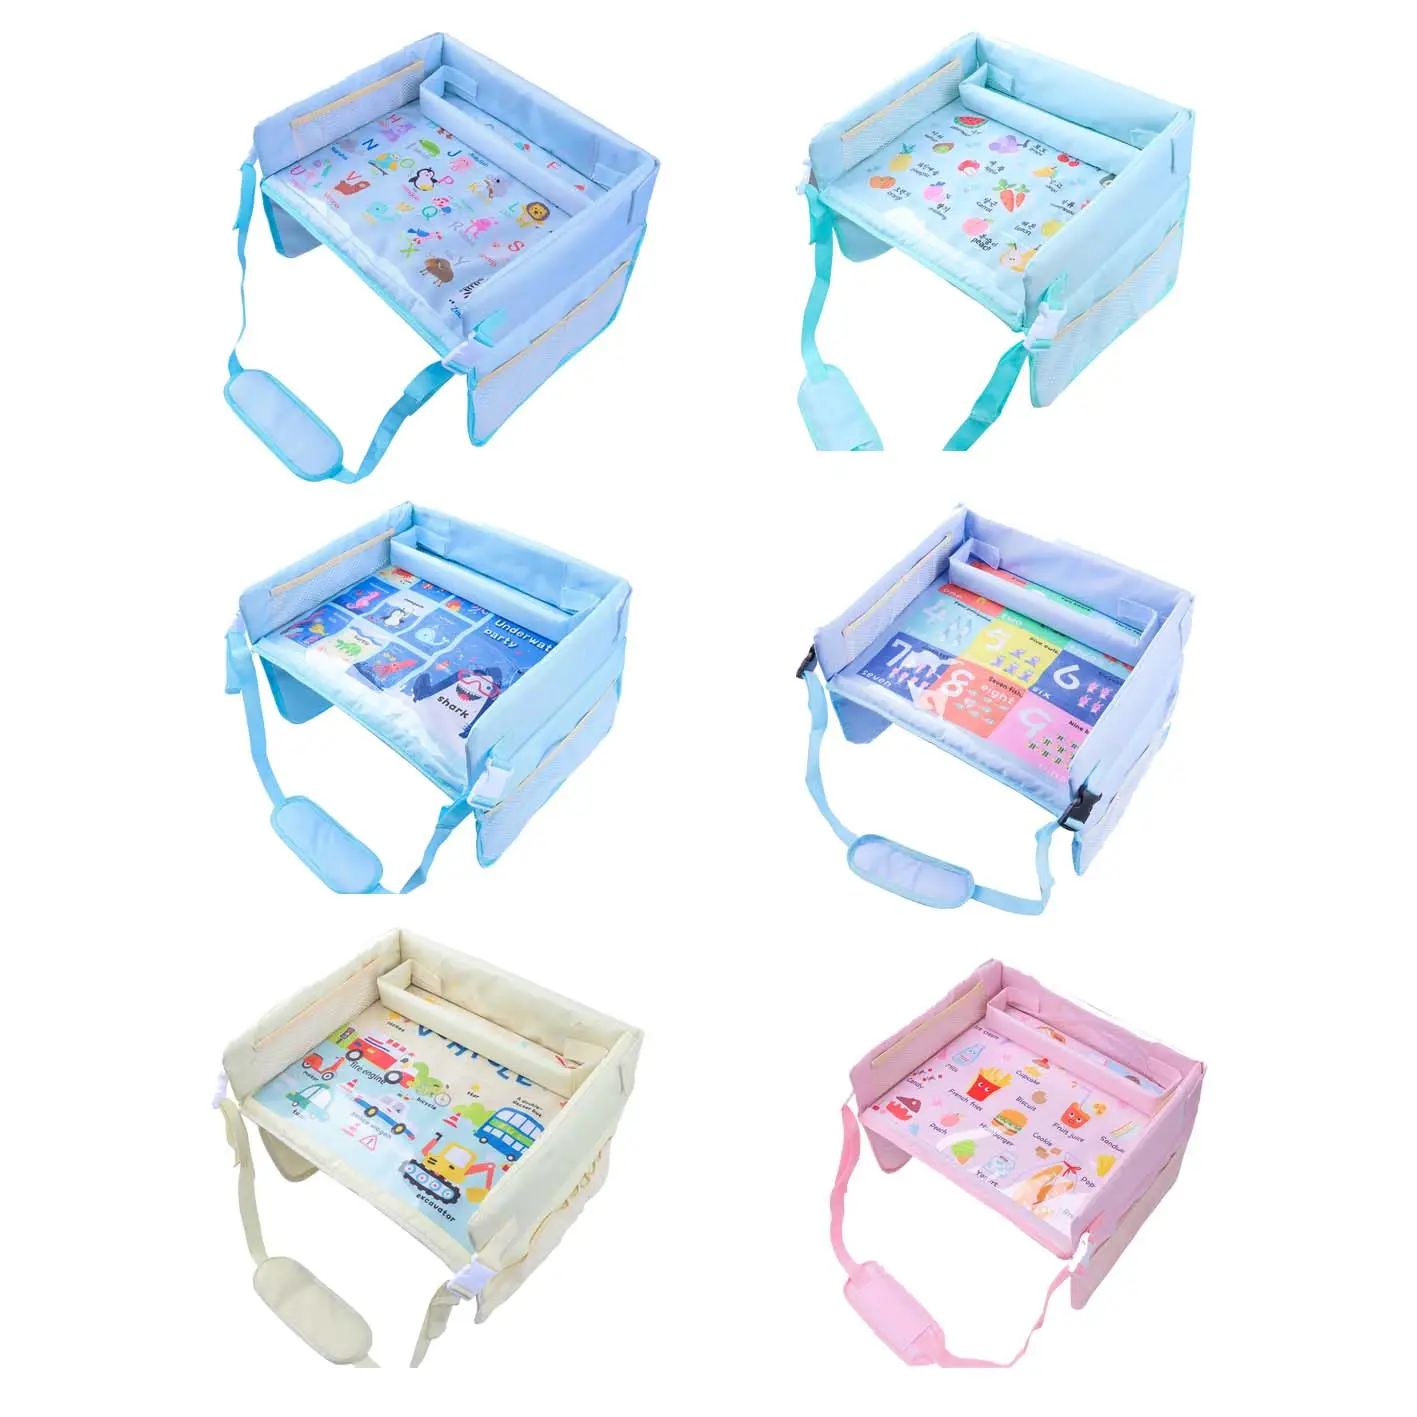 High Quality Baby Travel Tray Bundle For Multi-functional Car Seat Cartoon Tray Car Storage Waterproof Table Trip Essentials